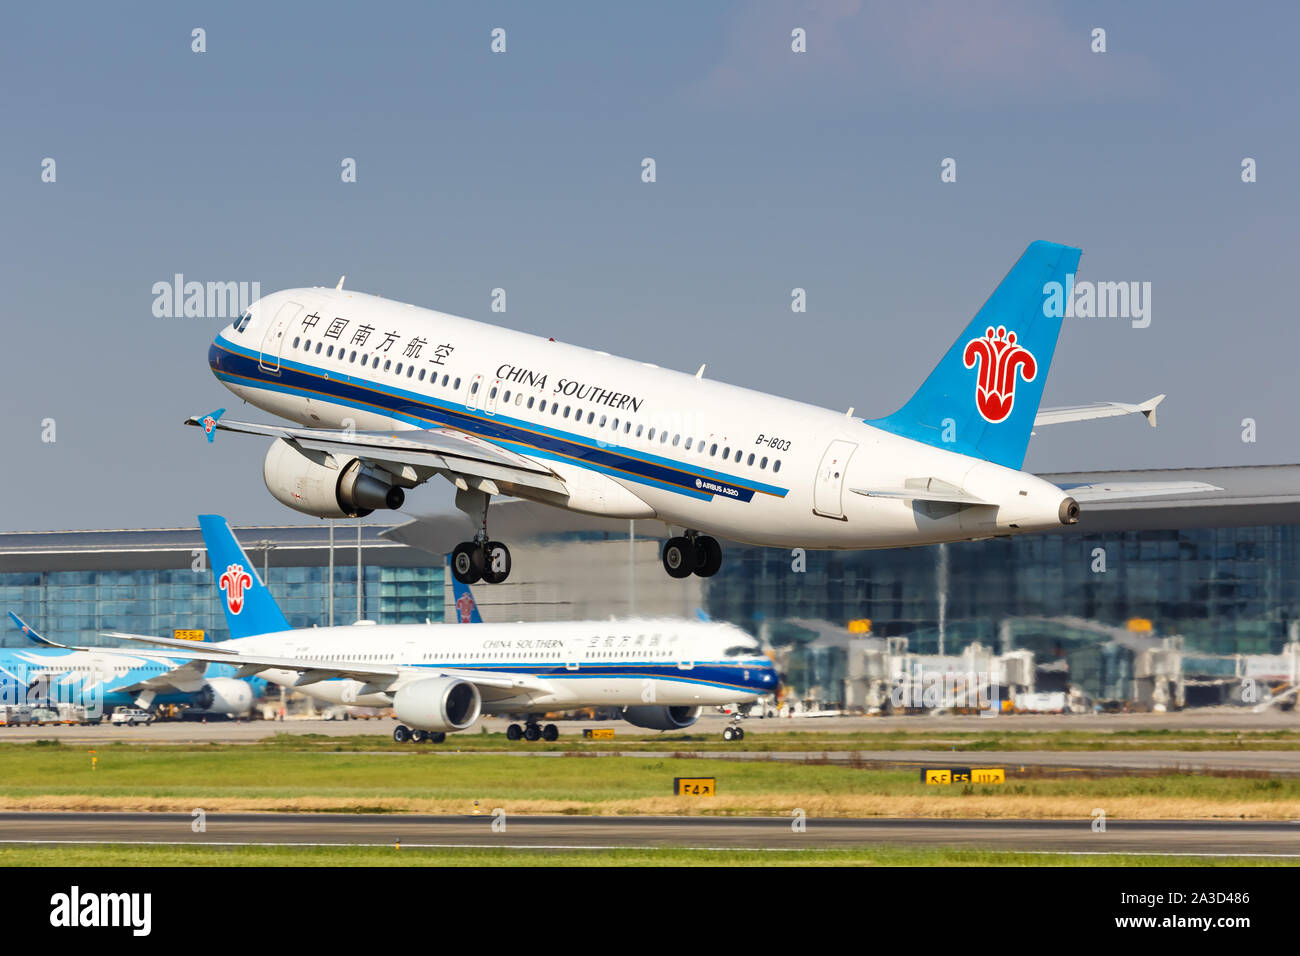 Guangzhou, China – September 23, 2019: China Southern Airlines Airbus A320 airplane at Guangzhou airport (CAN) in China. Stock Photo